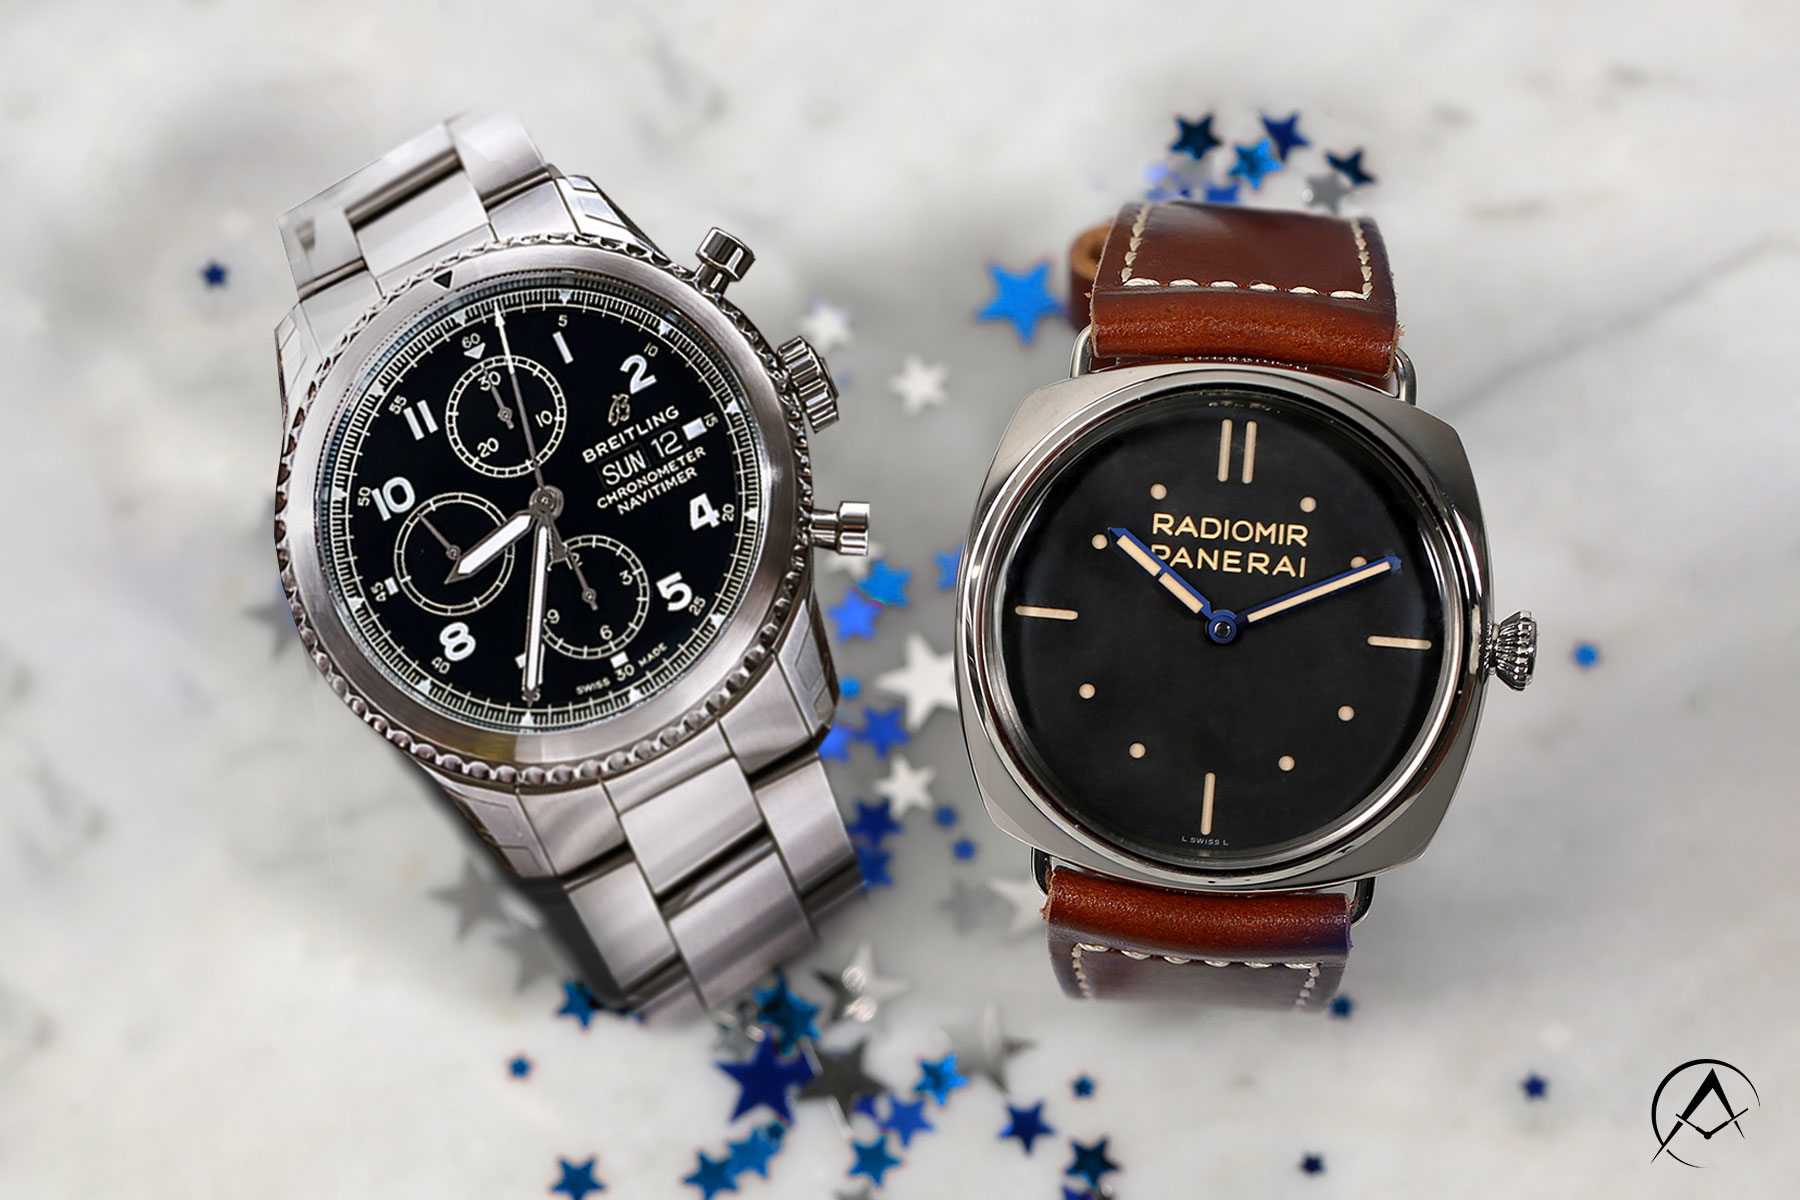 A Sterling Silver Breitling with Black Dial Sits Beside a Sterling Silver Panerai Radiomir with Brown Leather Strap on a White Marble Tabletop with Blue and Silver Stars.